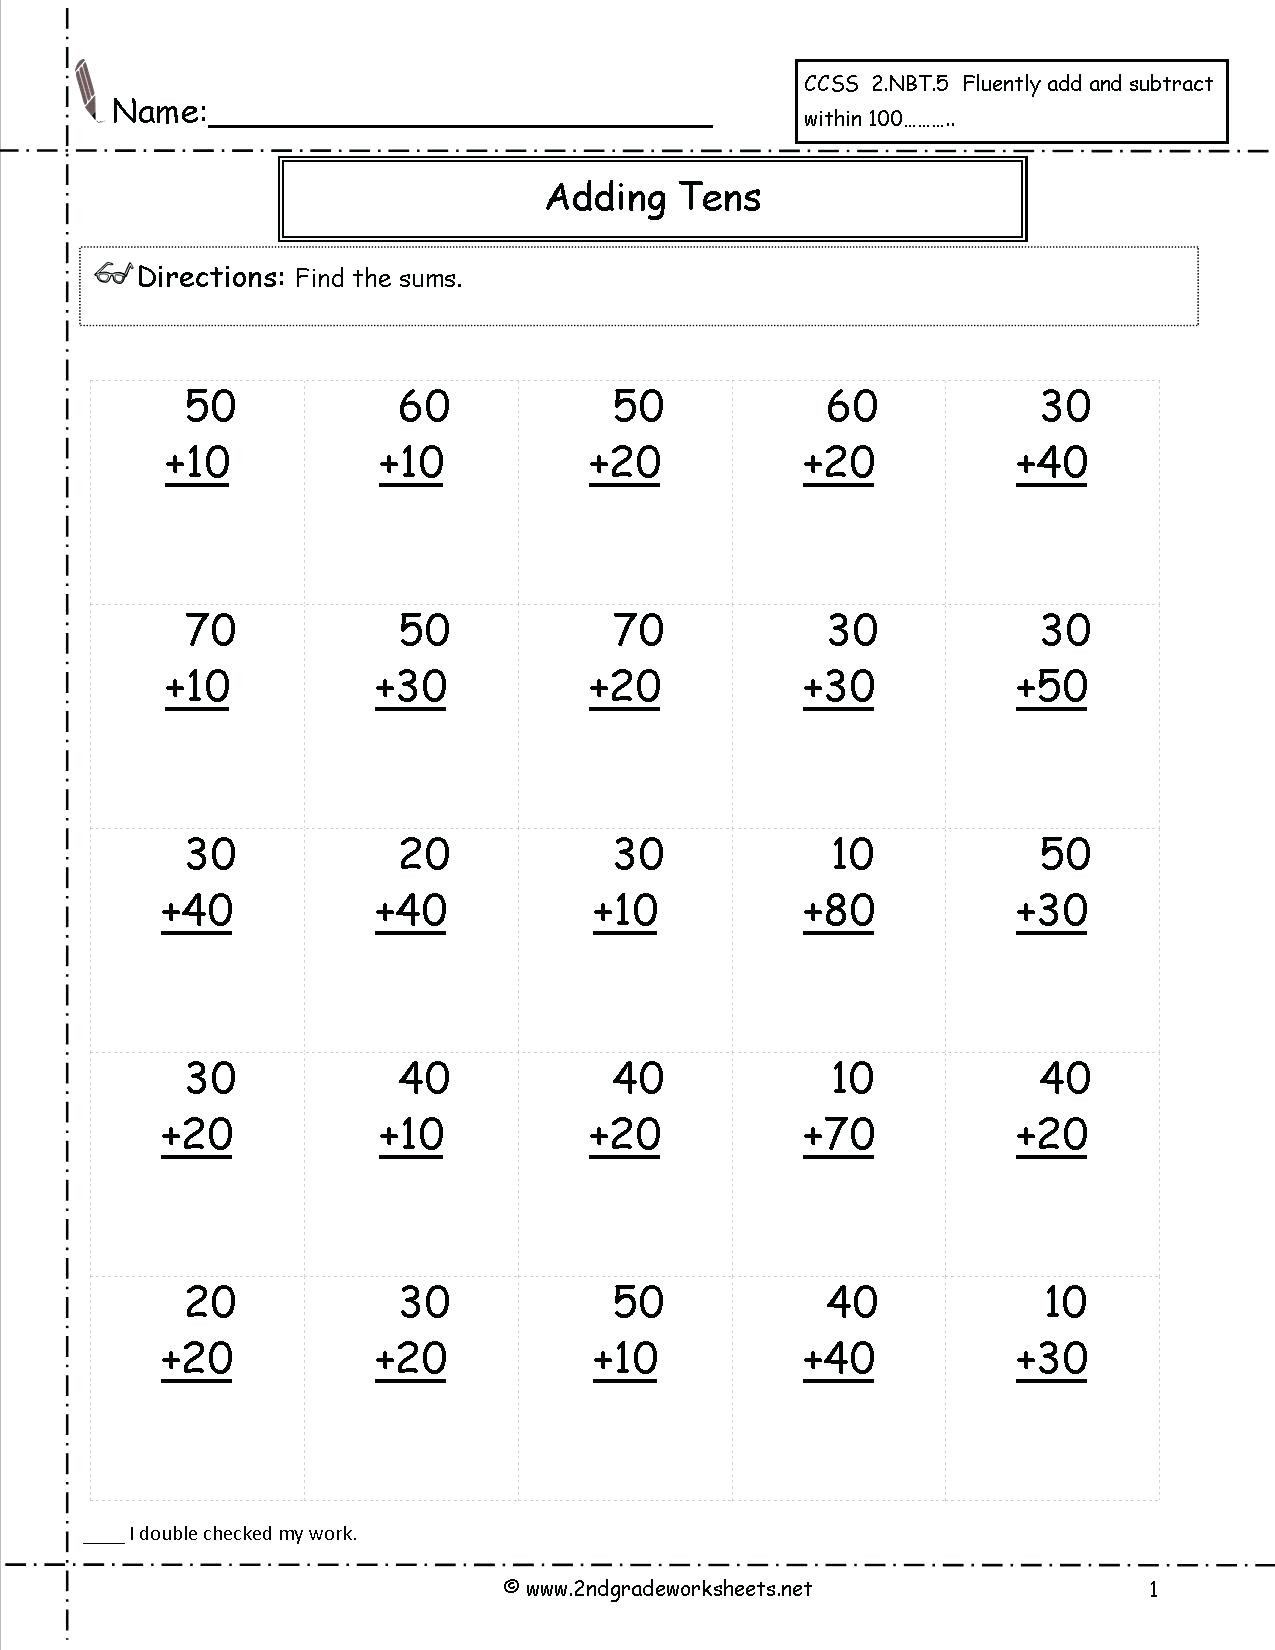 5-free-math-worksheets-fourth-grade-4-addition-adding-whole-tens-4-addends-amp